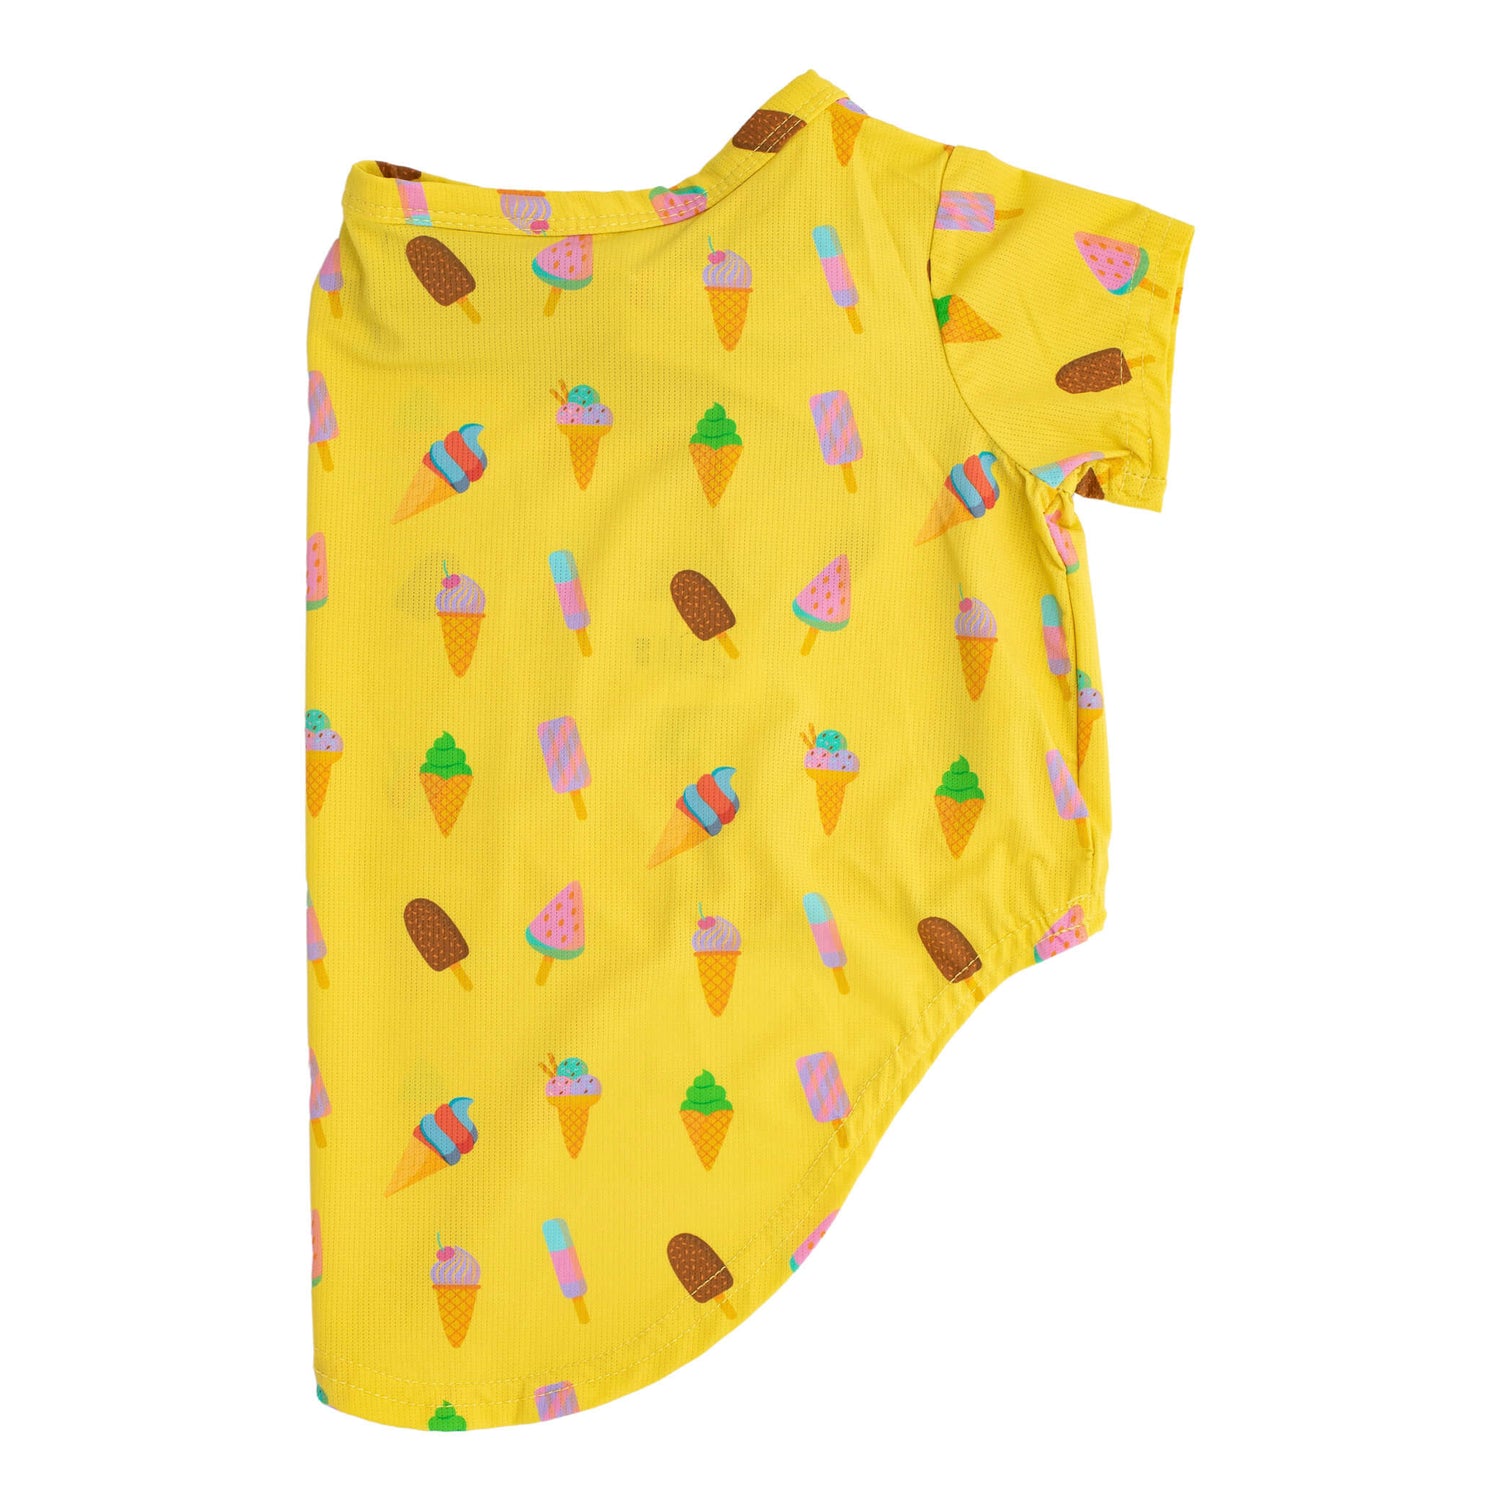 A side profile flat lay of Vibrant Hounds Ice-cream dream cooling shirt. The shirt is yellow with ice creams and ice blocks printed on it.